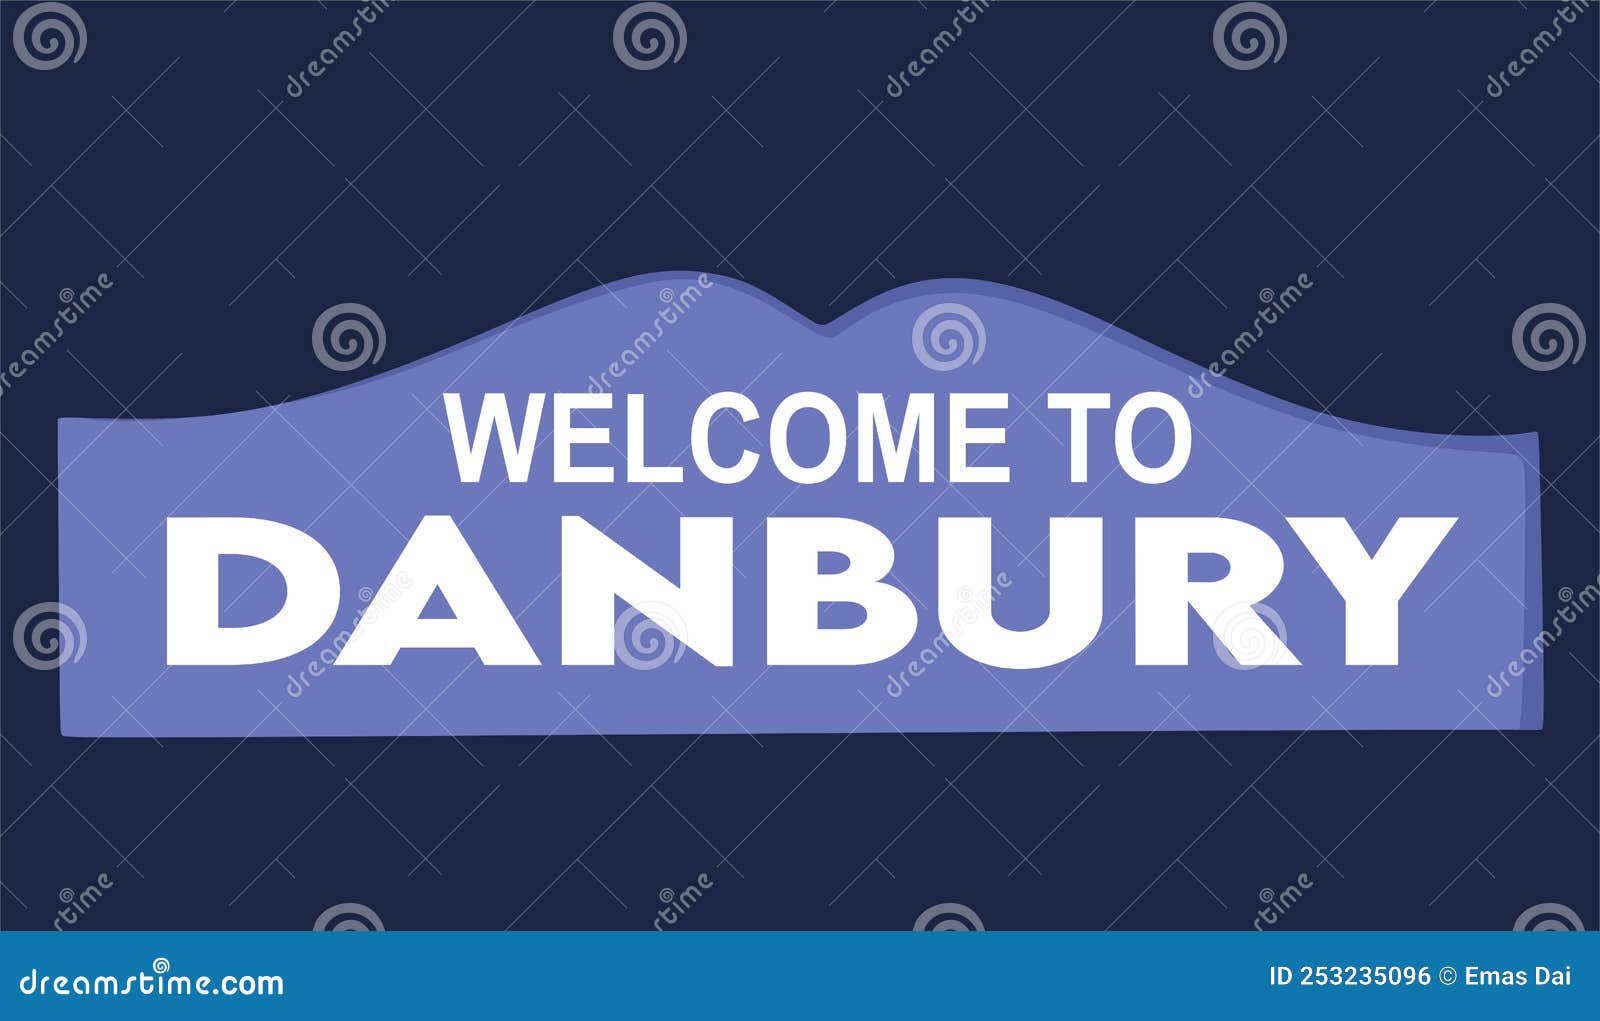 danbury connecticut with blue background